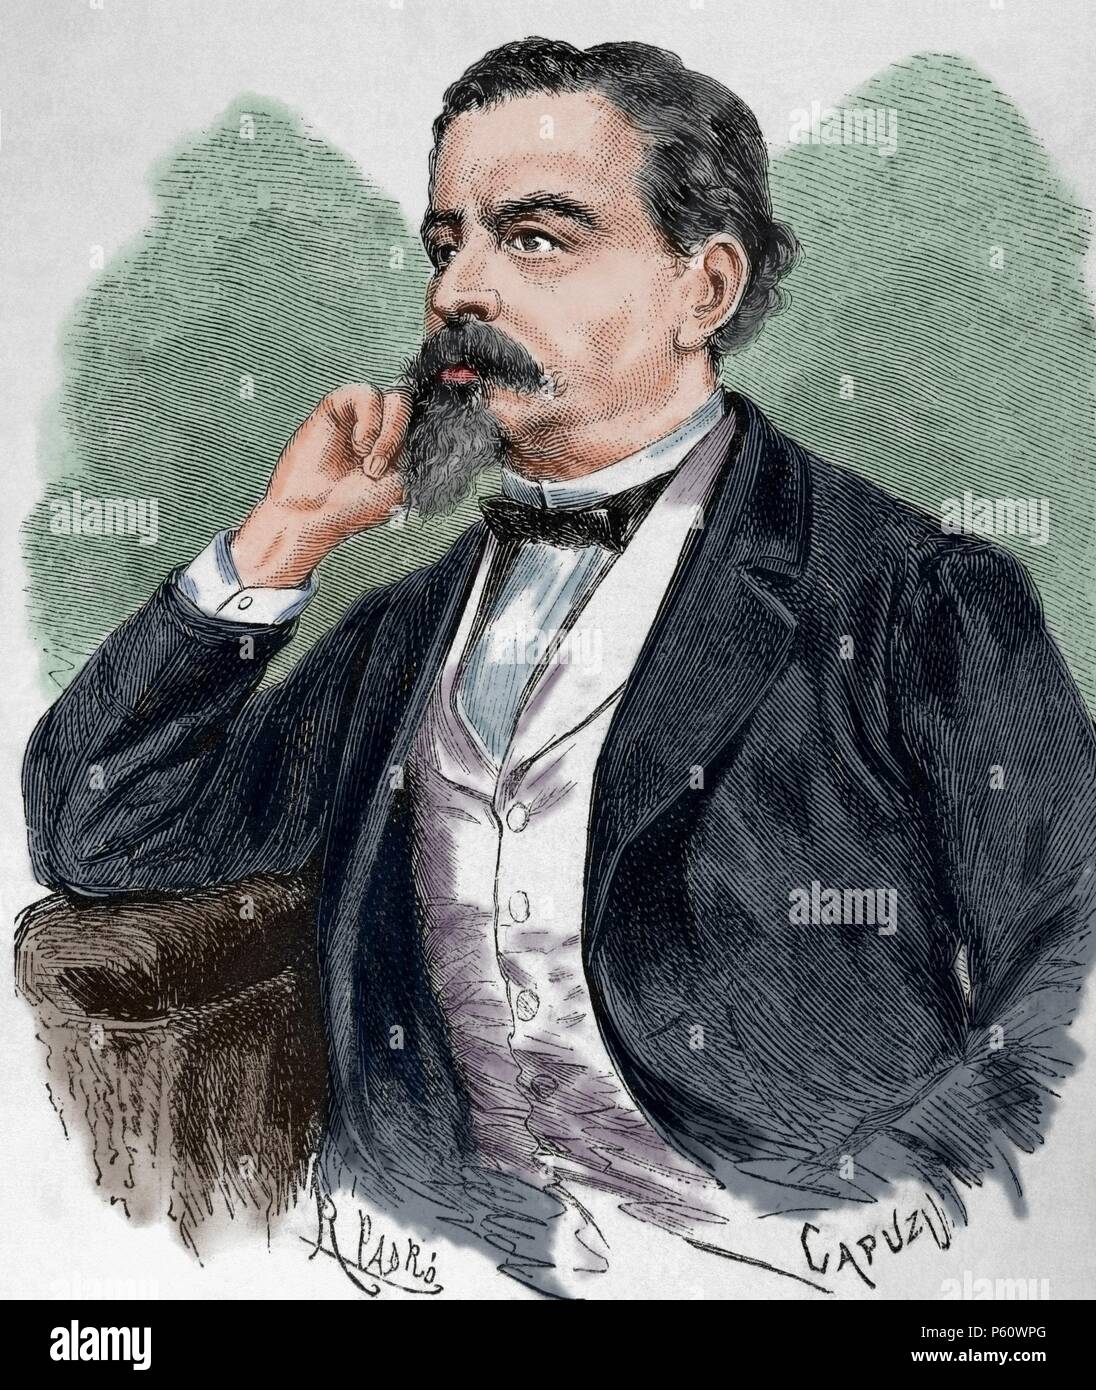 Francisco Camprodon Lafont (1816-1870). Spanish writer. Engraving by Capuz (1824-1899). The Spanish and American Illustration, 1870. Colored. Stock Photo